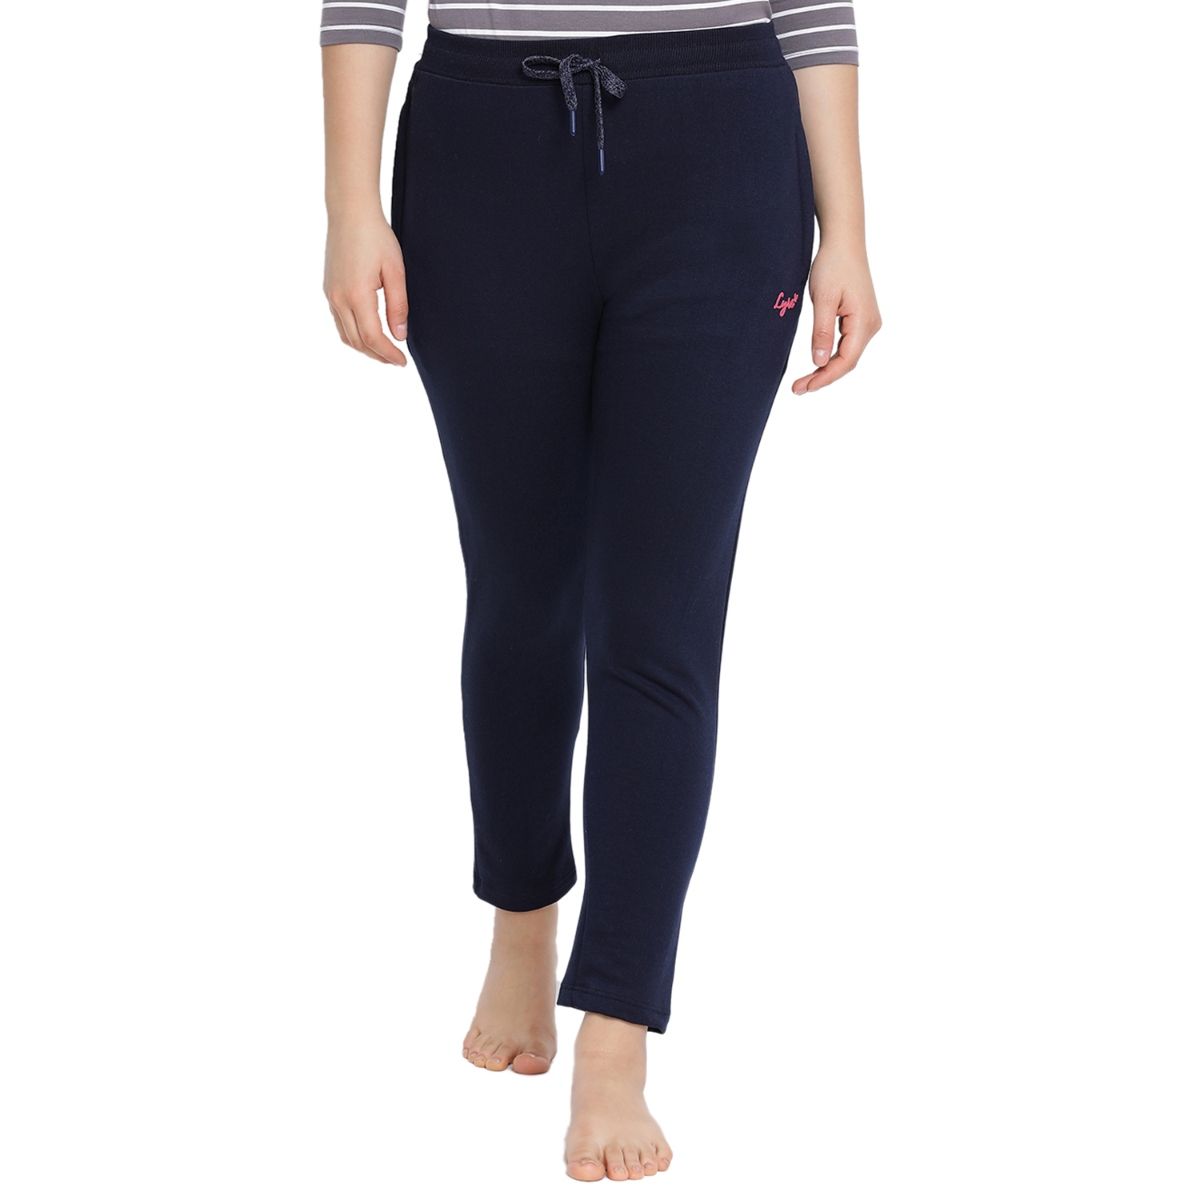 Lyra Pink & Navy Cotton Sports Track Pants - Pack Of 2